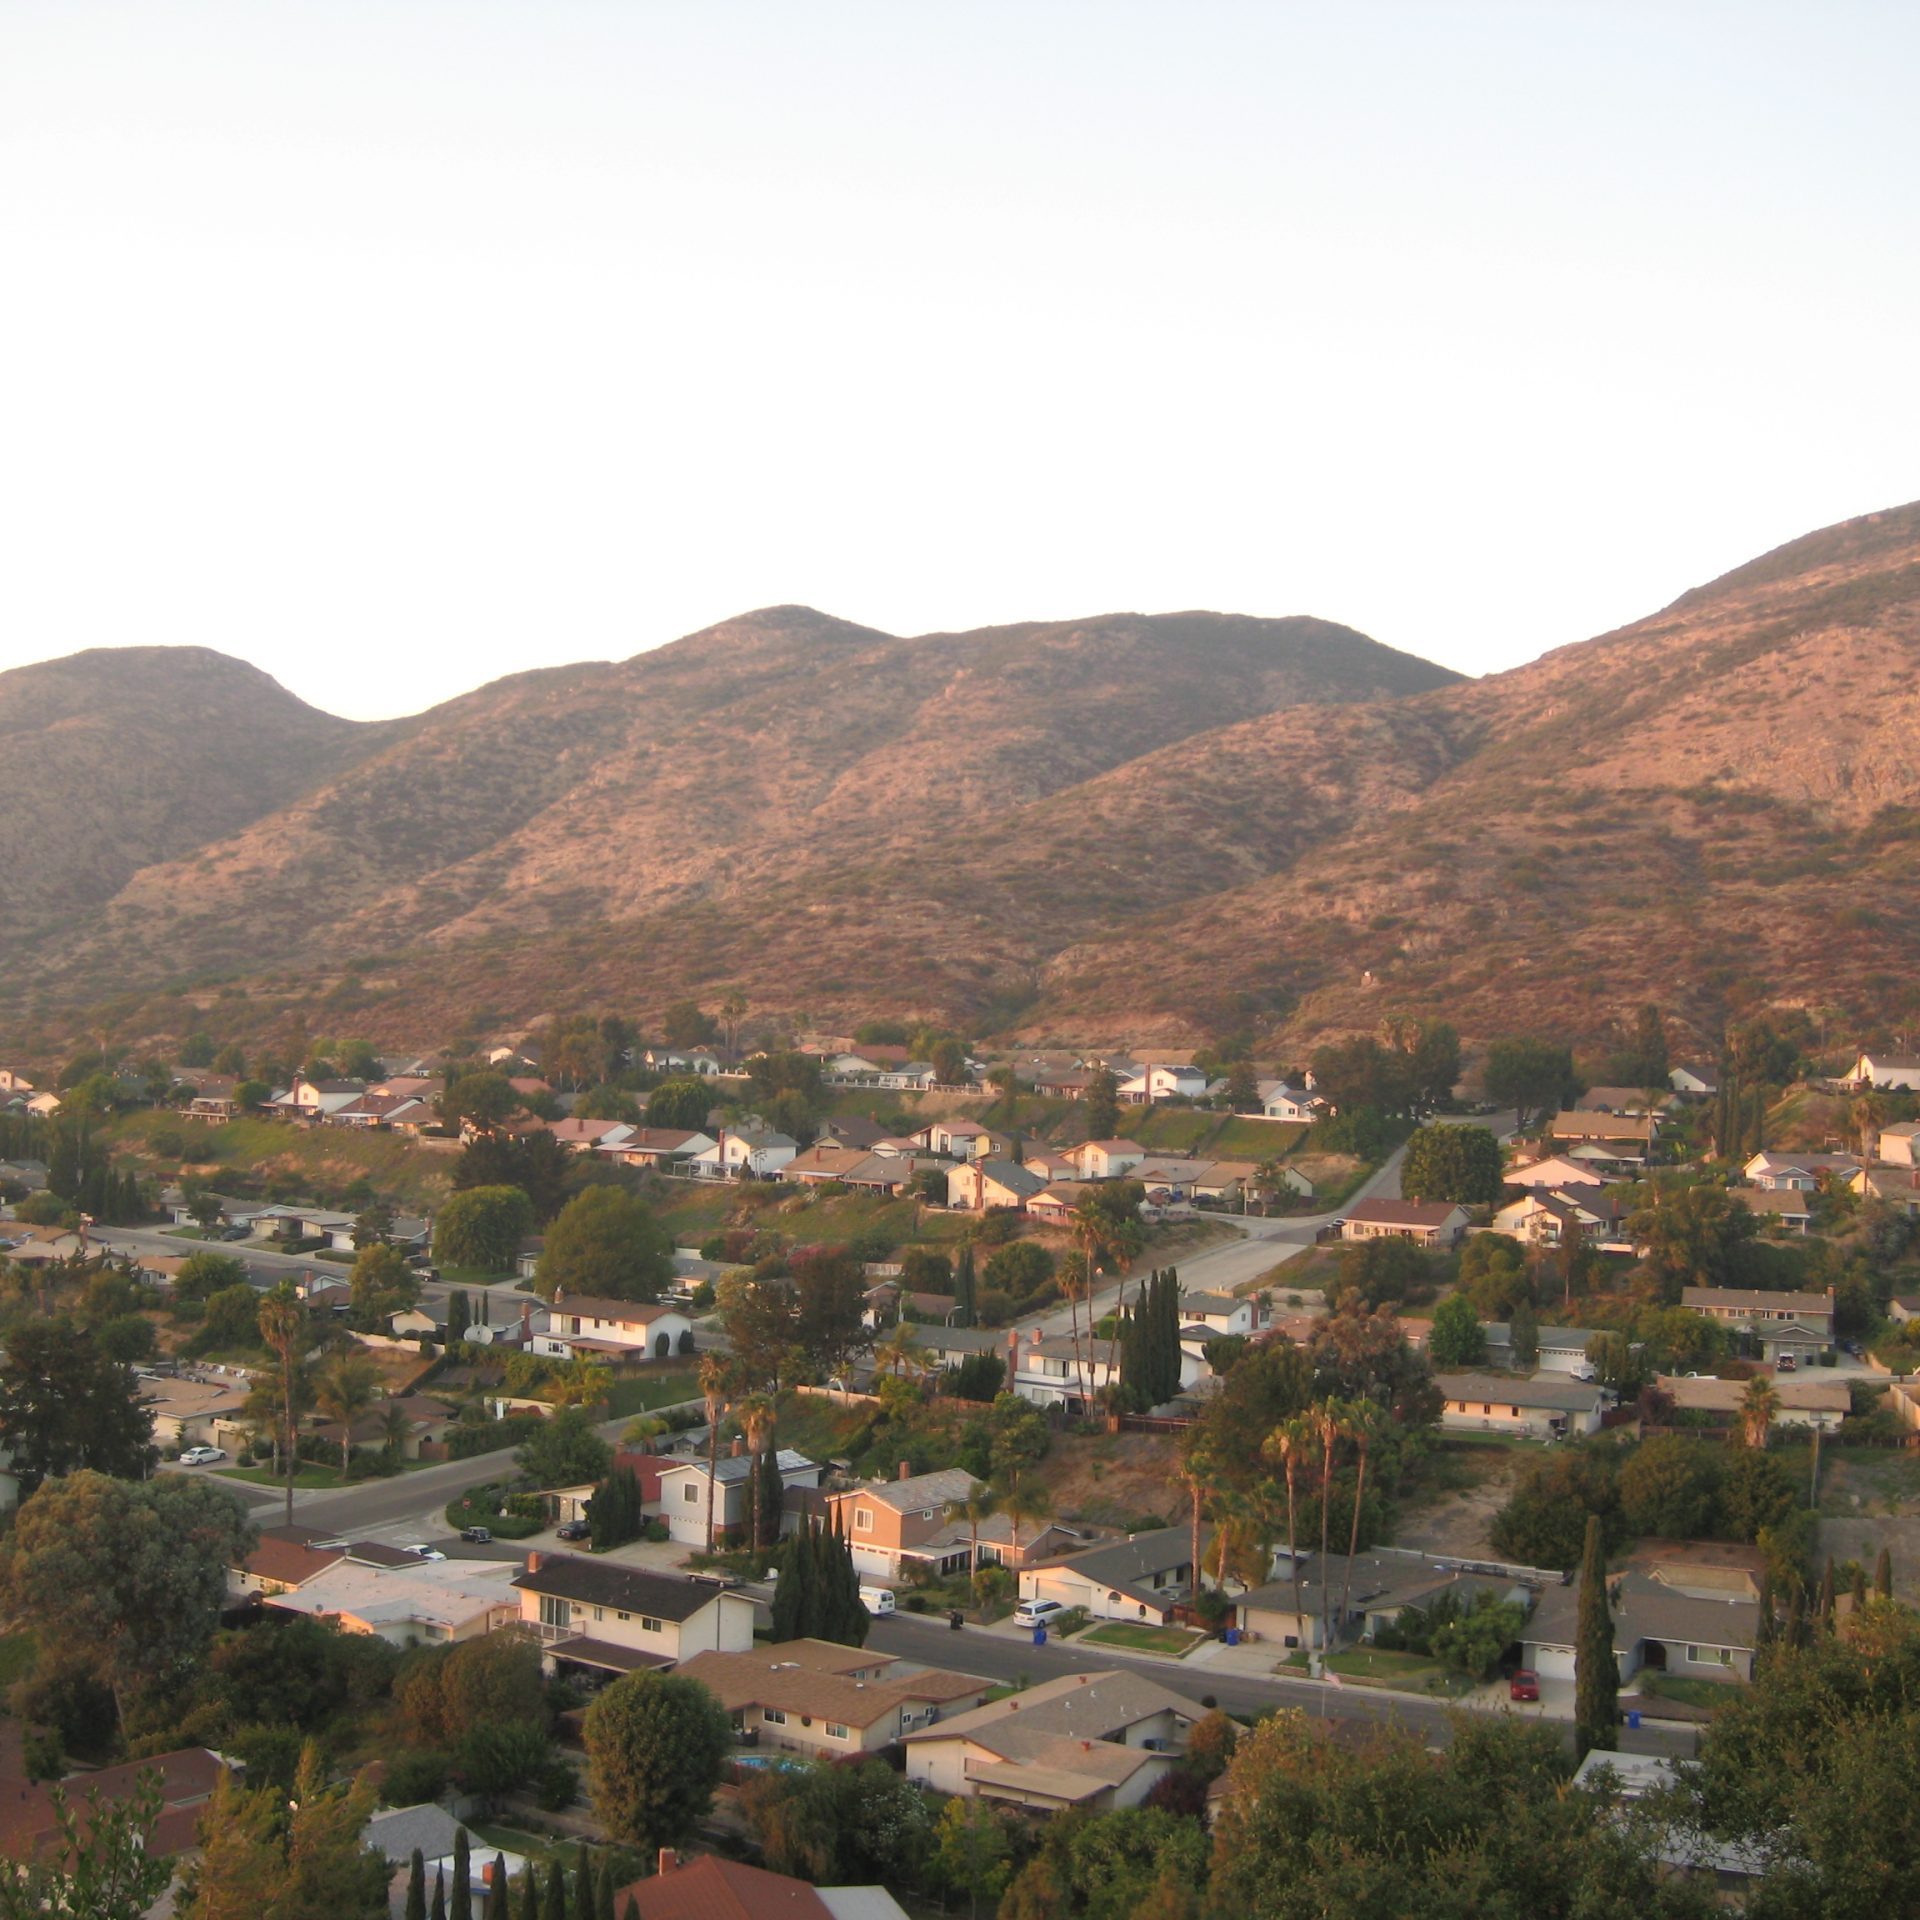 Cowles_Mountain_San_Carlos_by_Patty_Mooney